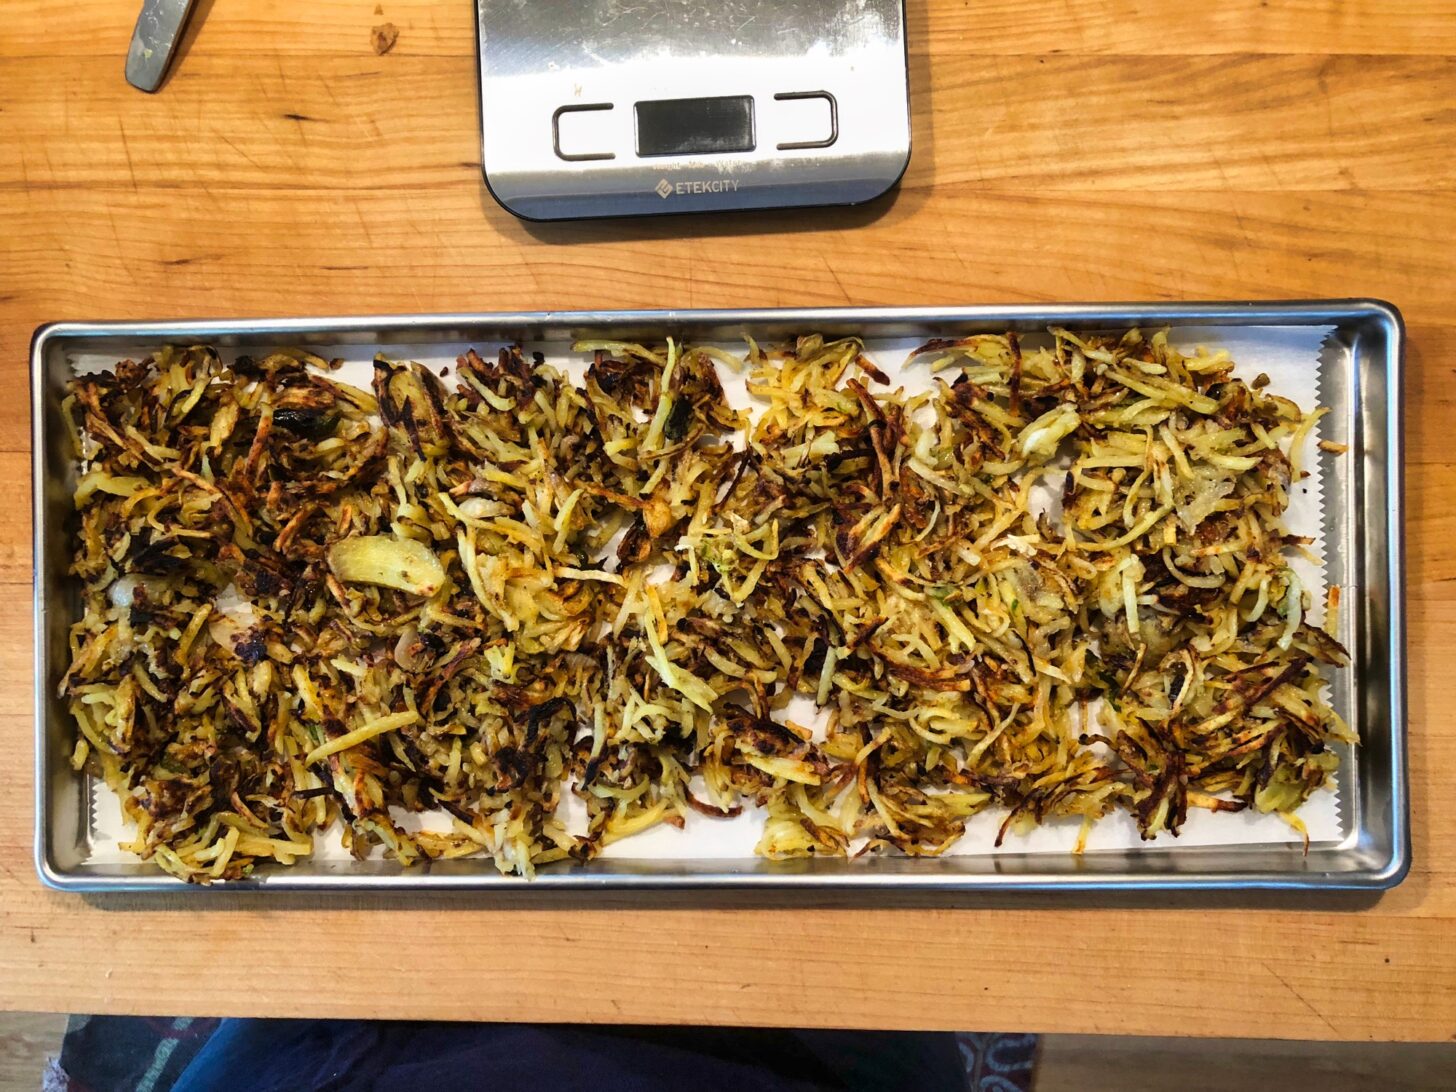 a tray of cooked hashbrows about to be inserted into a freeze drying machine